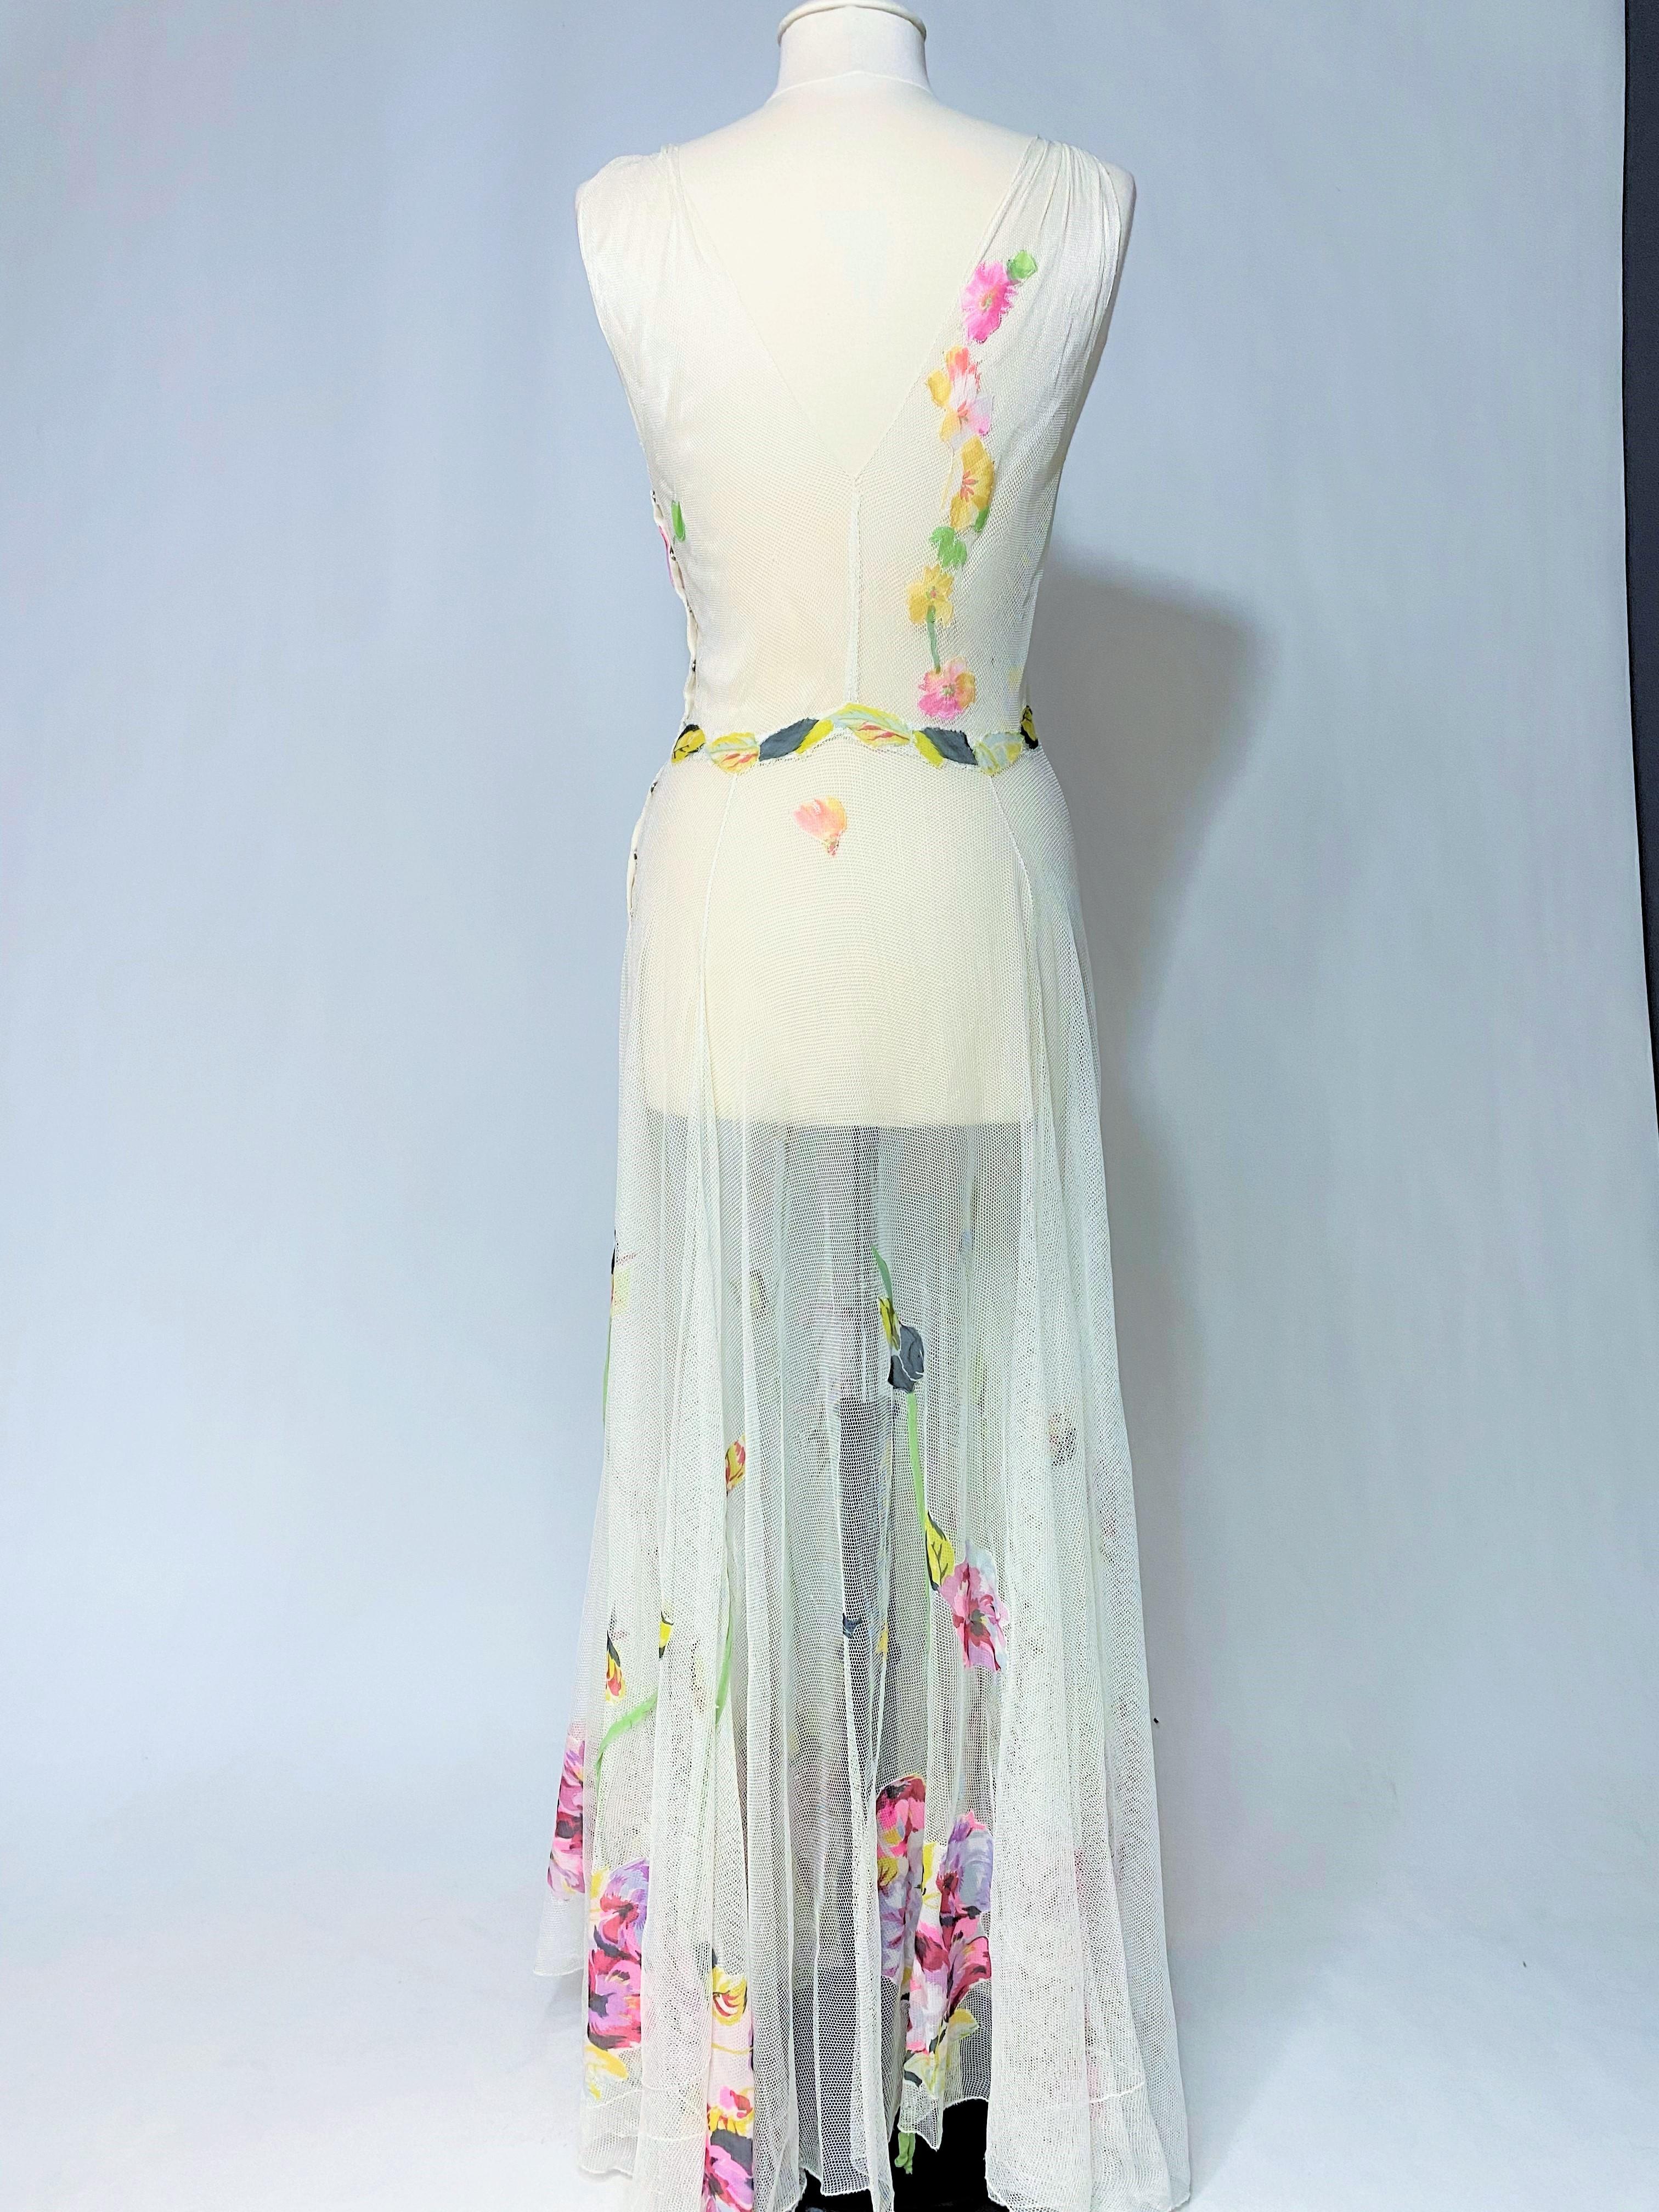 A Romantic Dress in white cotton Net applied with printed Chiffon Circa 1938 For Sale 9